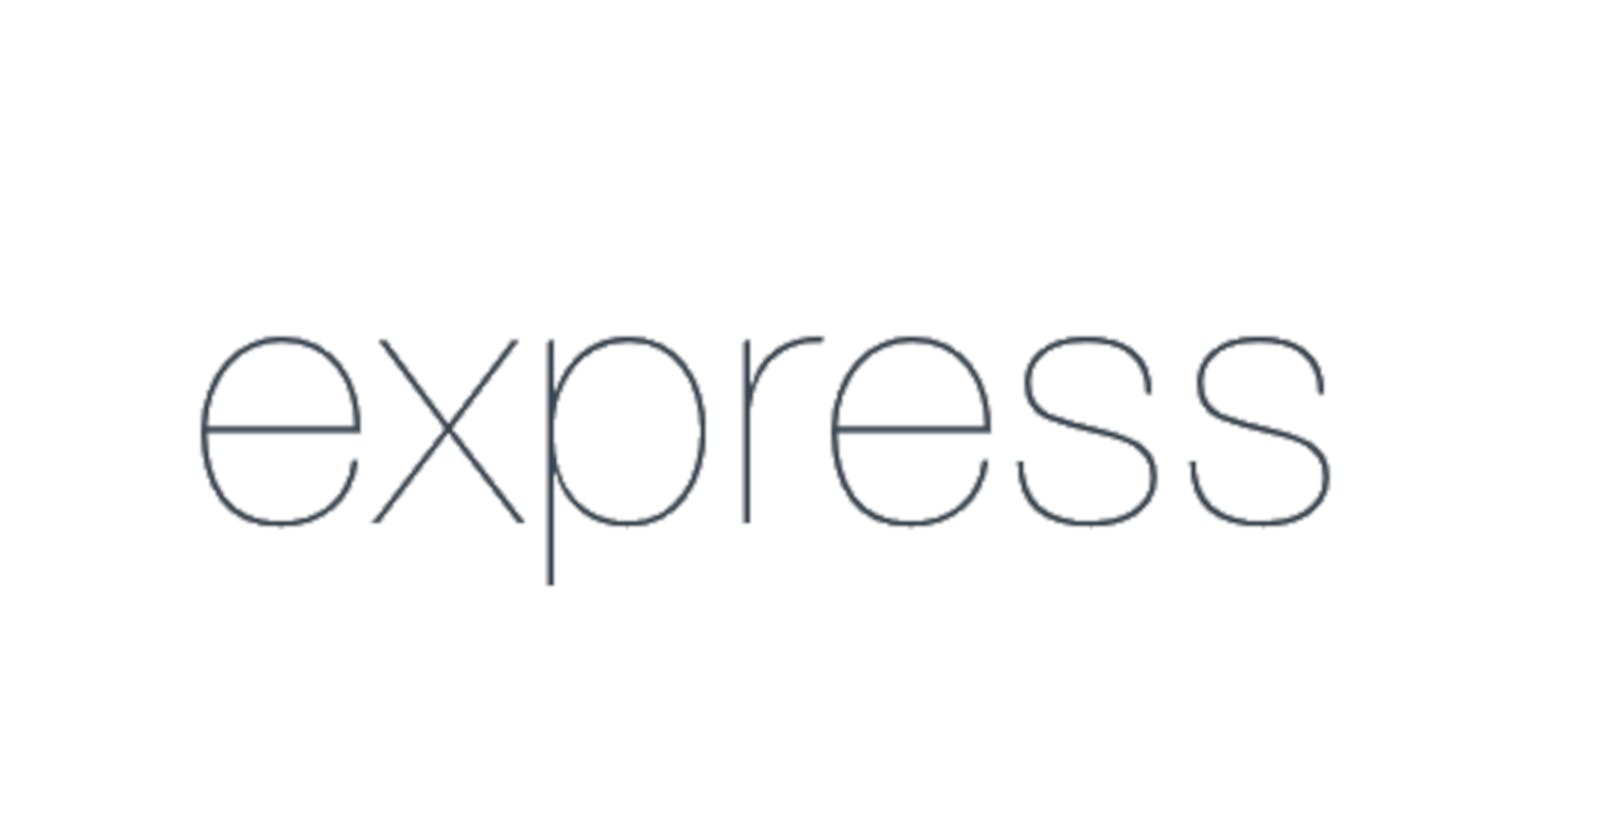 Where Are Images Stored In Express?